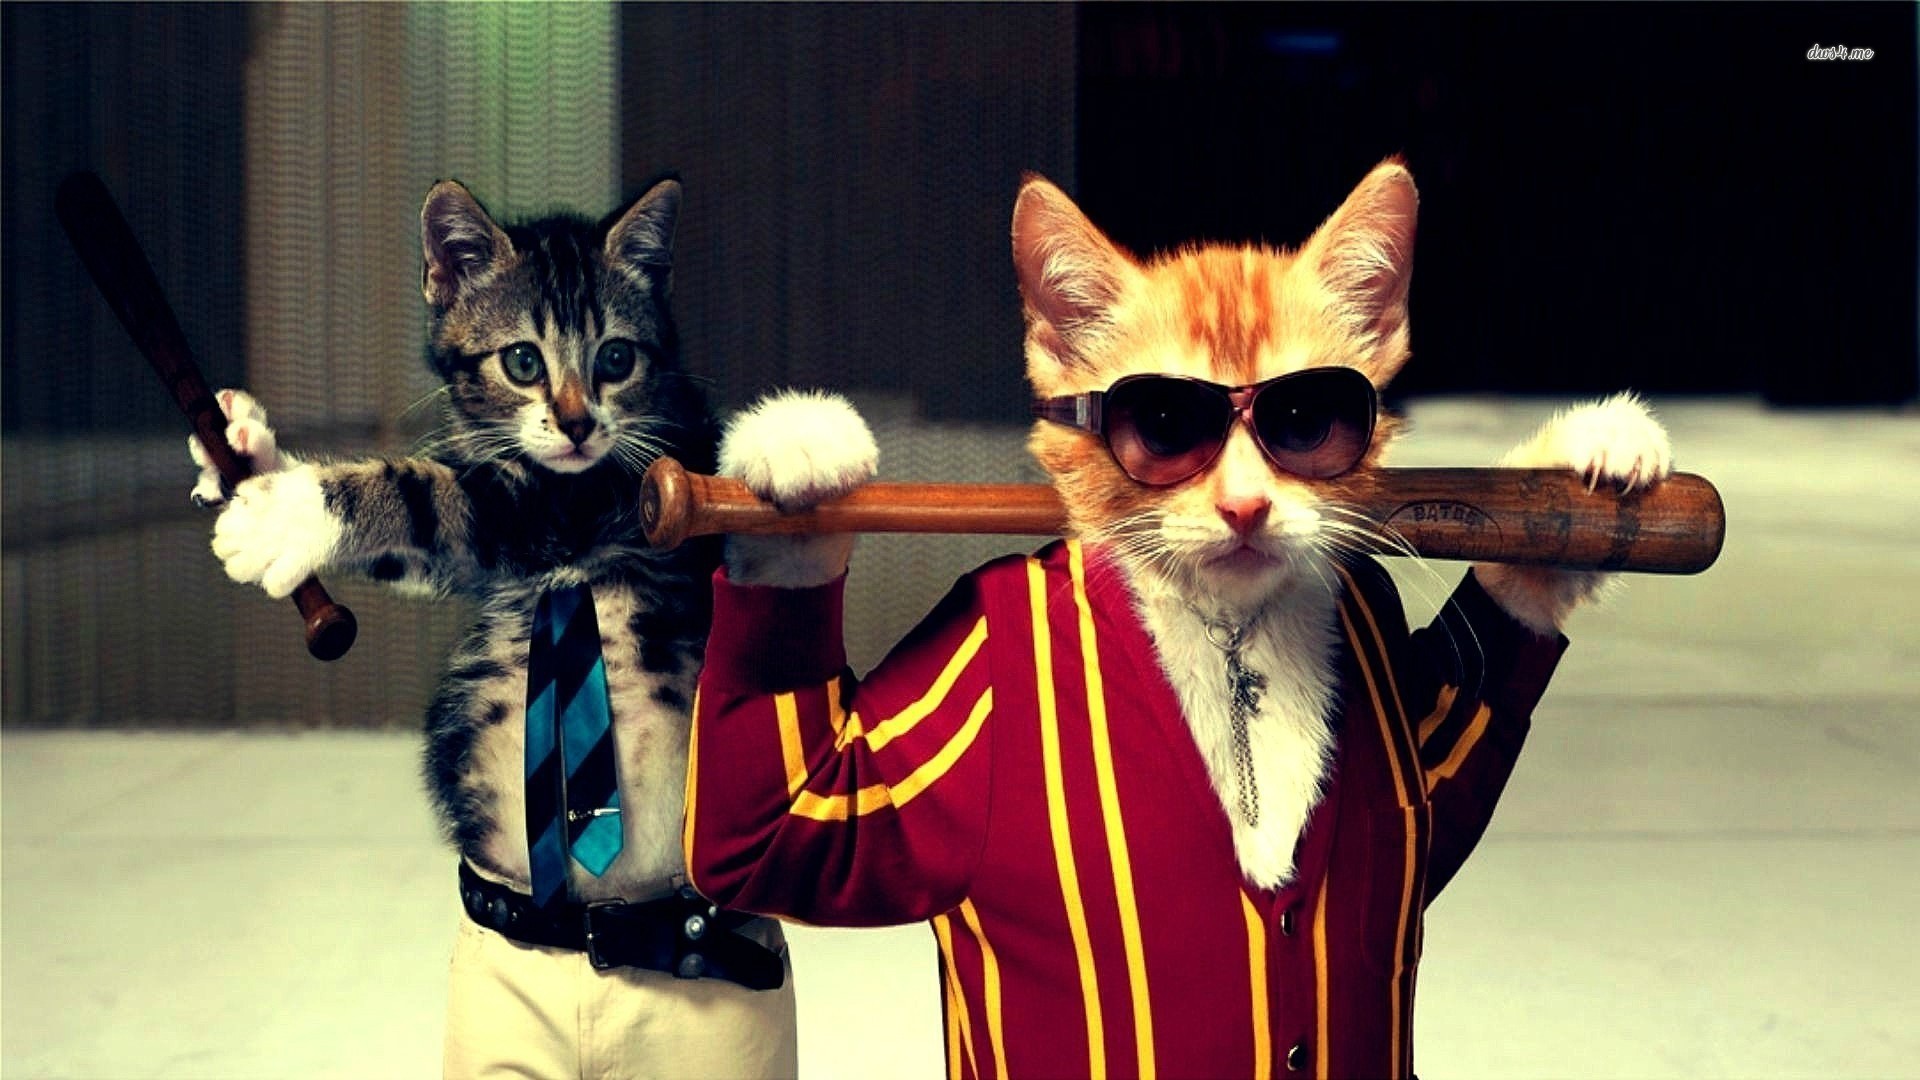 1920x1080 ... Cool Cat With Sunglasses - wallpaper.